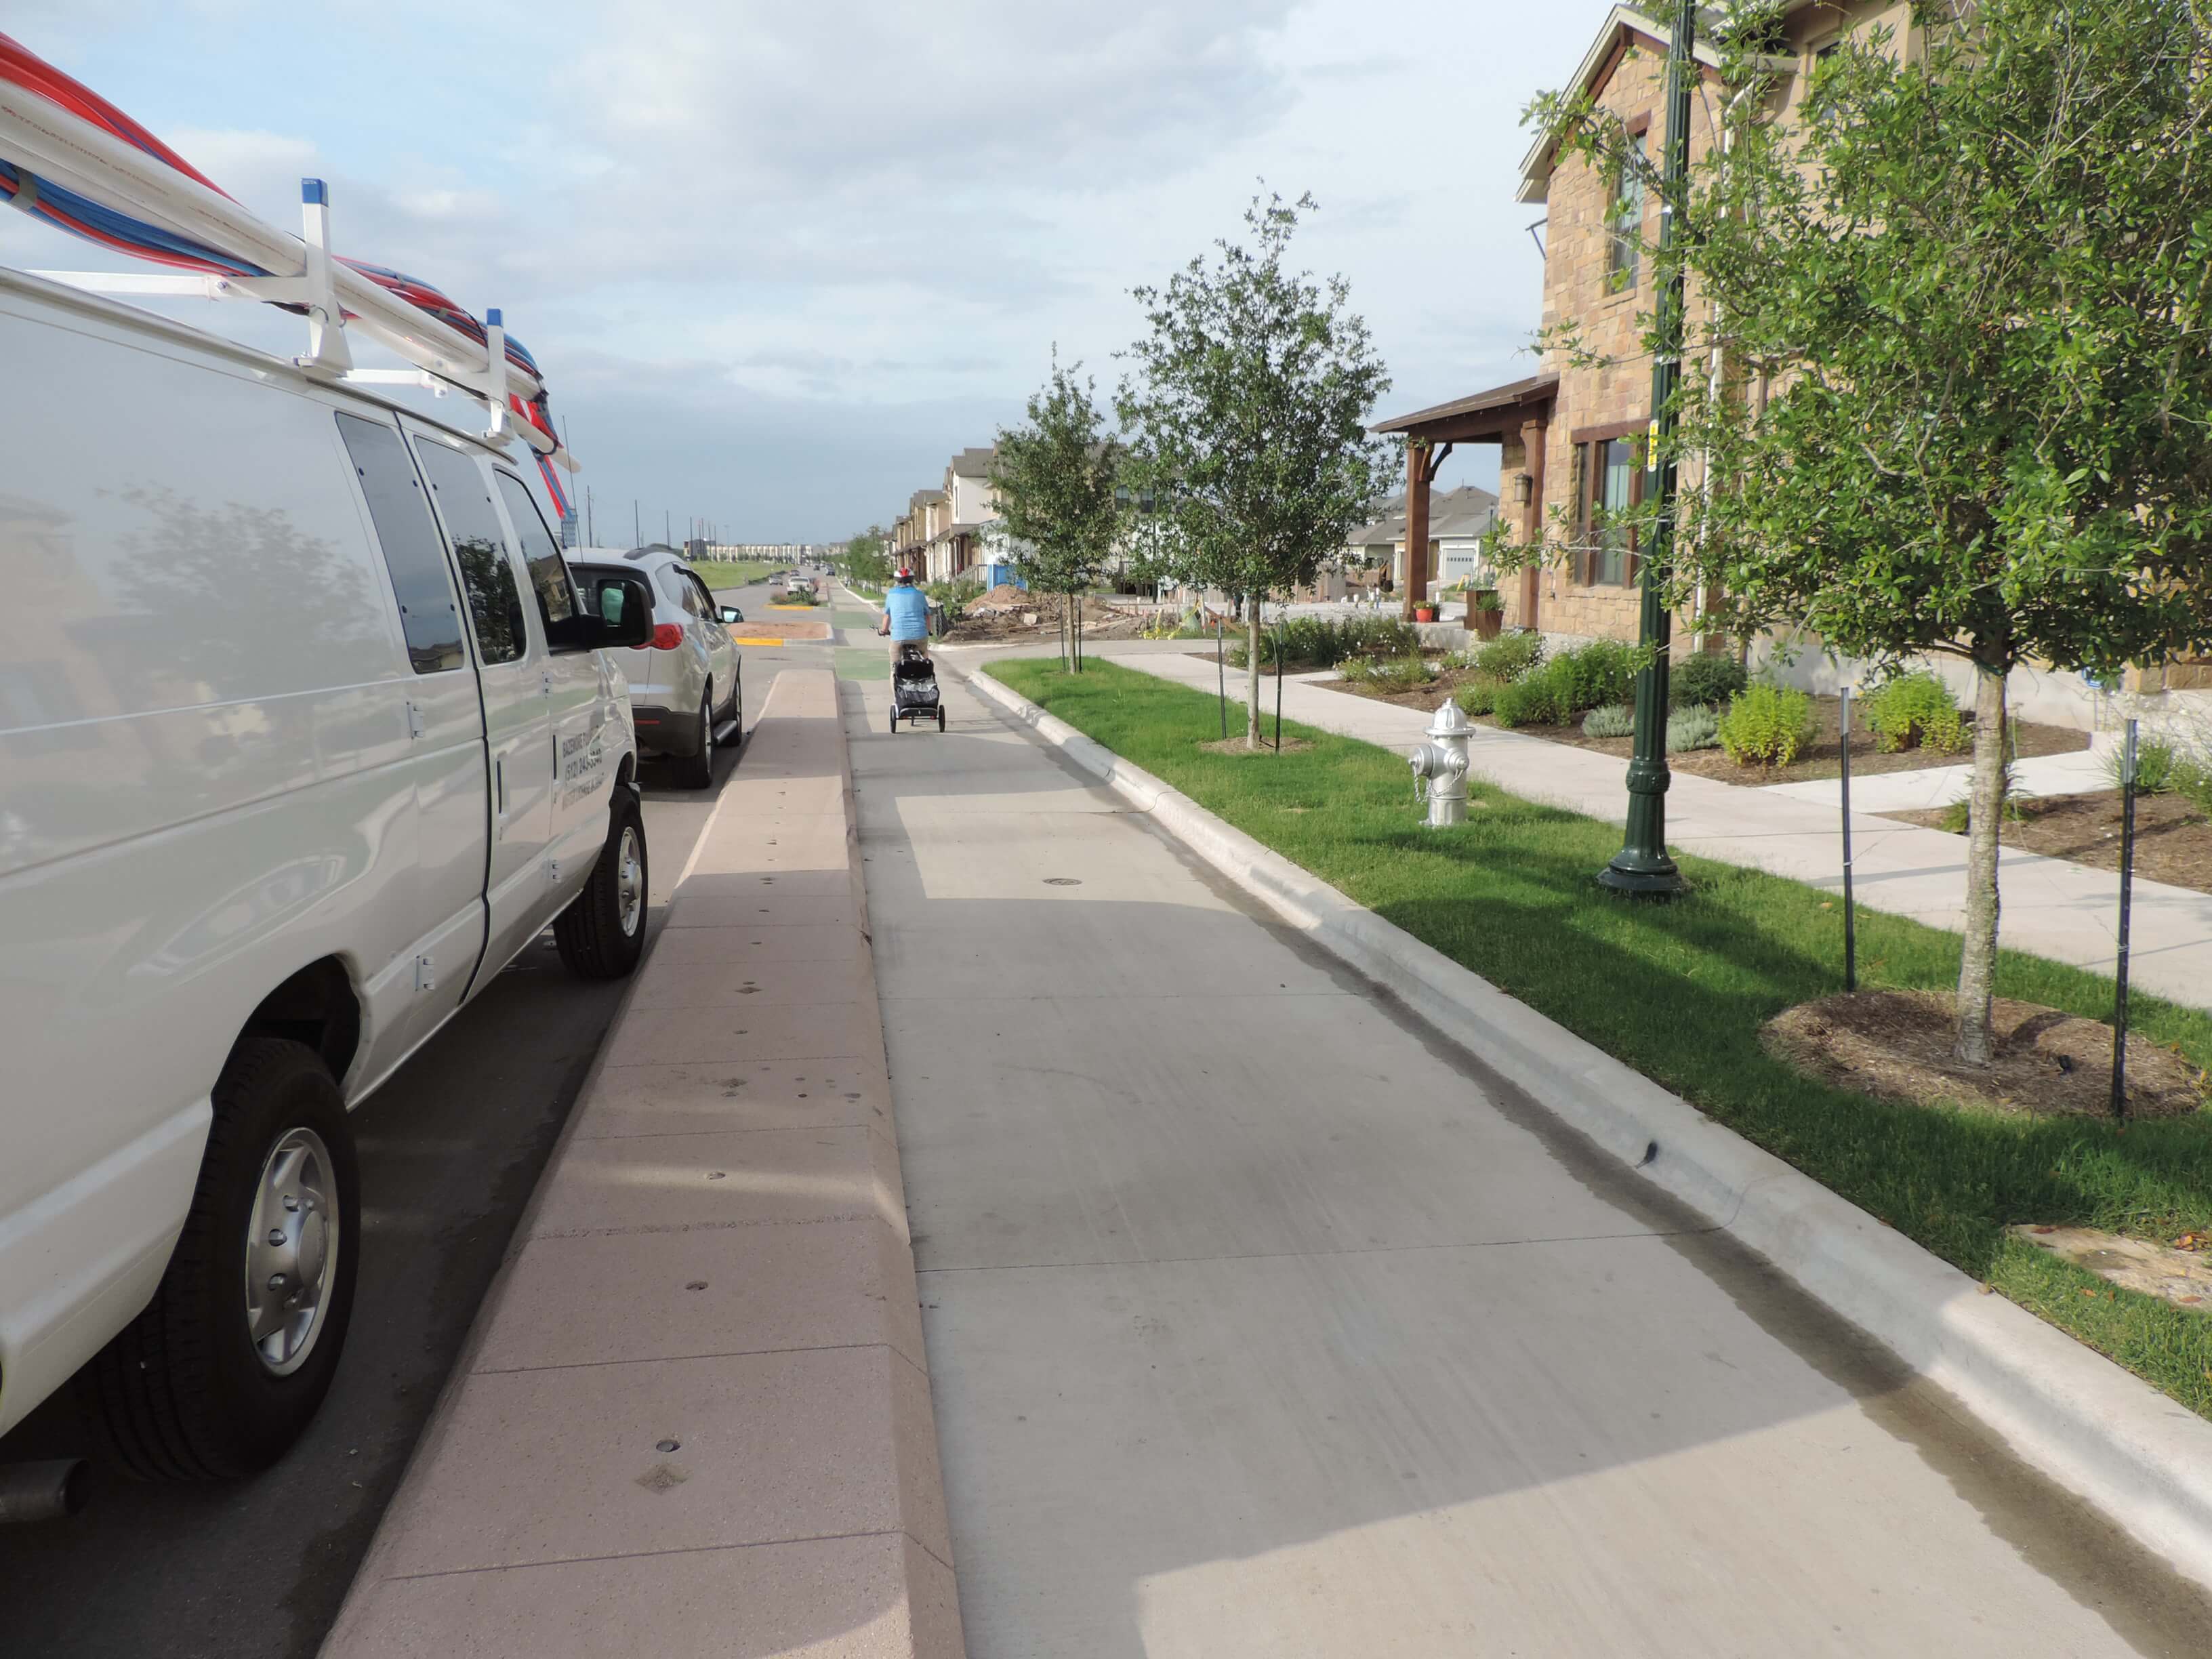 Parked vehicles are shown in a residential area, with a wide curb between the parked vehicles and the bike lane. A person wearing a helmet is pedaling a bicycle with a trailer in the bike lane. A grassy strip separates the bike lane from the sidewalk.